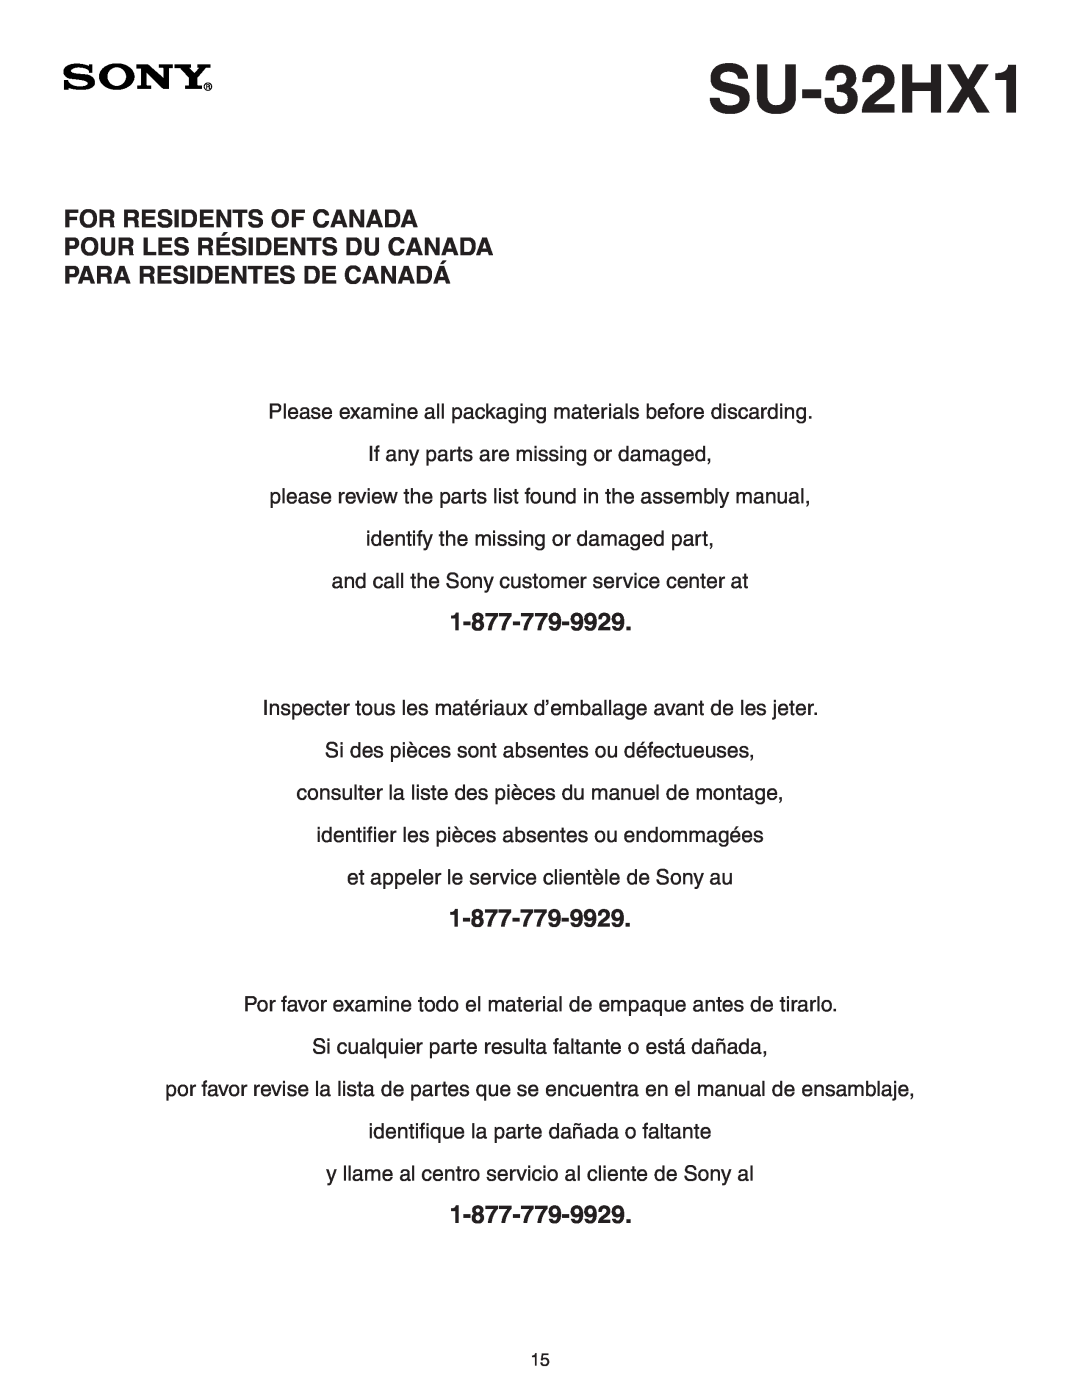 Sony SU-32HX1 manual For Residents Of Canada, Pour Les Résidents Du Canada, Para Residentes De Canadá 